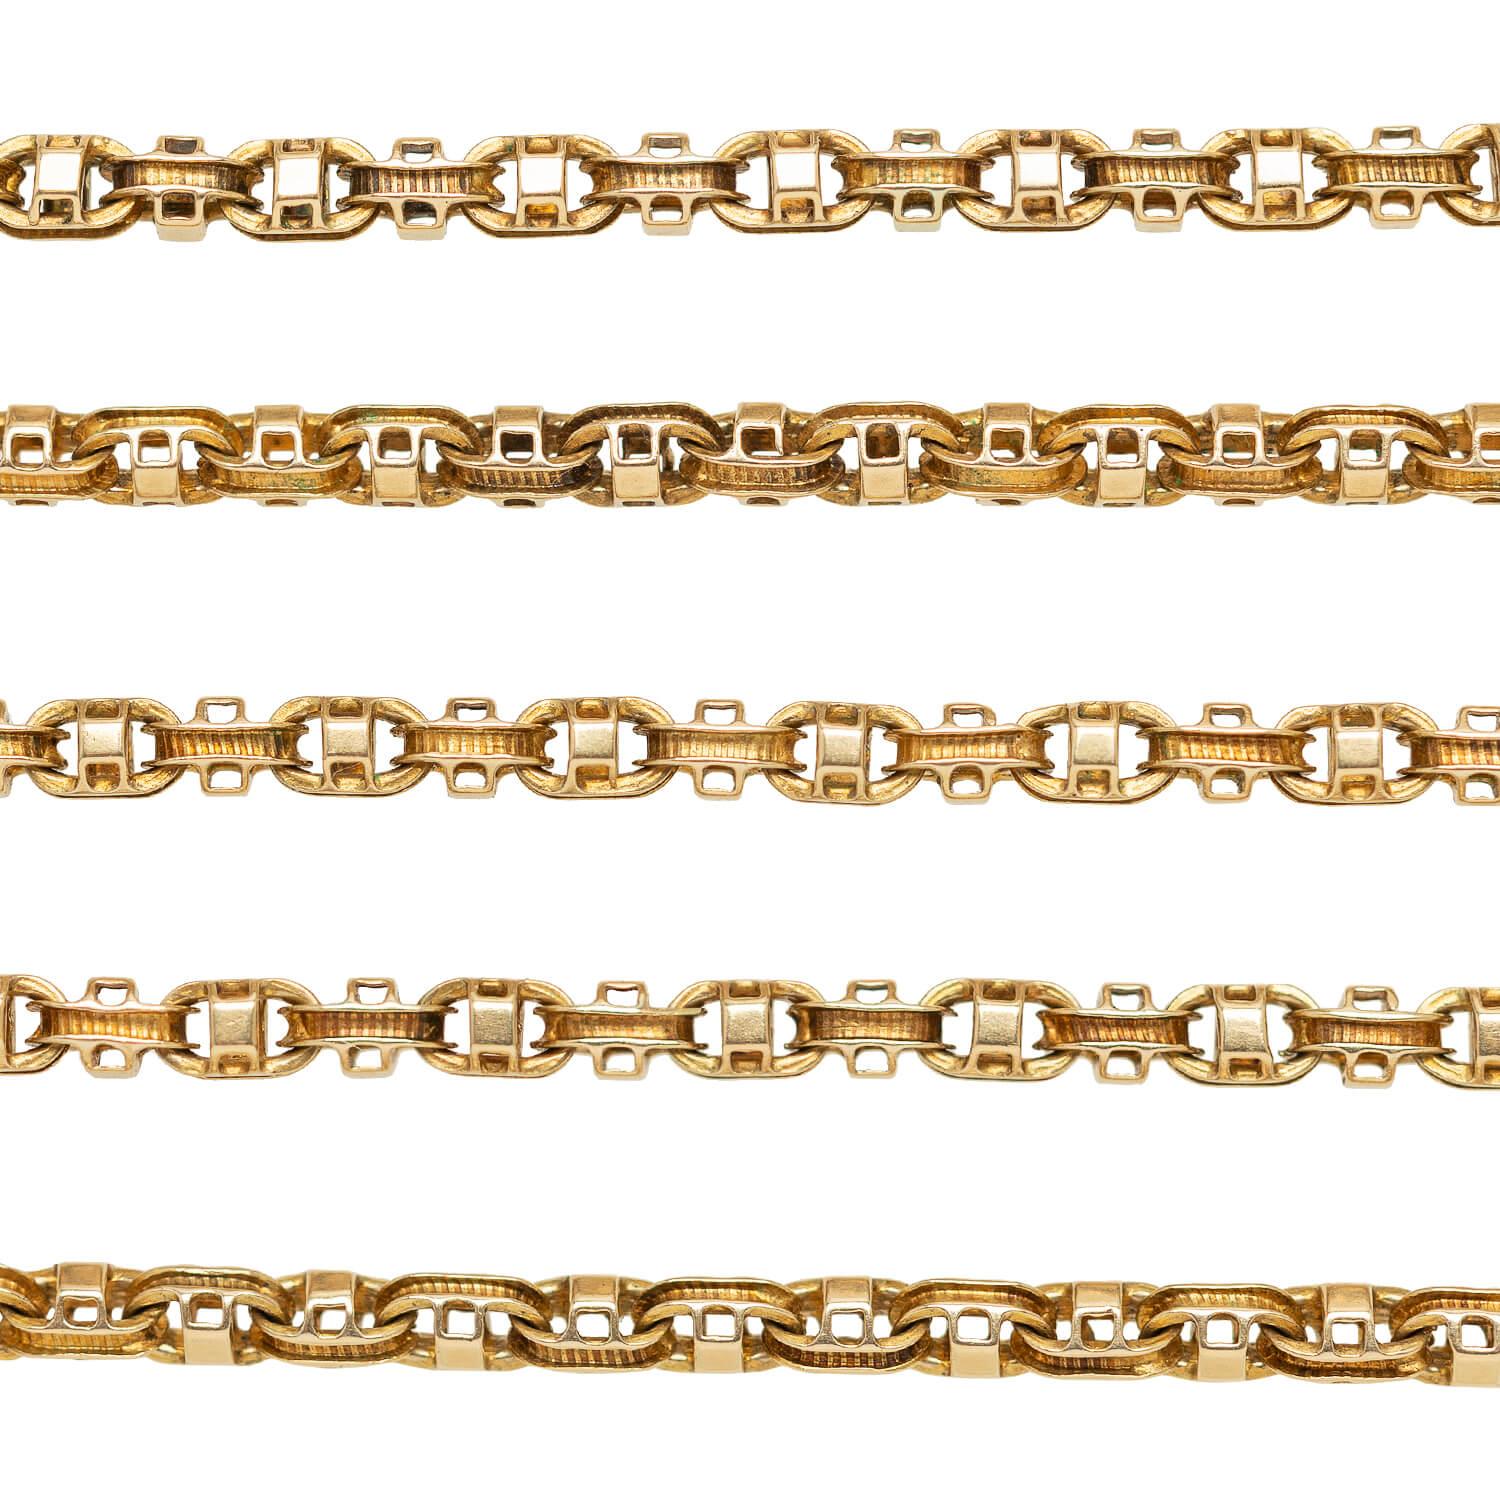 A gorgeous slide necklace from the Victorian (ca1880) era! Crafted in 15k yellow gold, interlocking fancy mariner links form the chain, accented with delicate line work details throughout each link. Included on the chain is a square slide, etched on